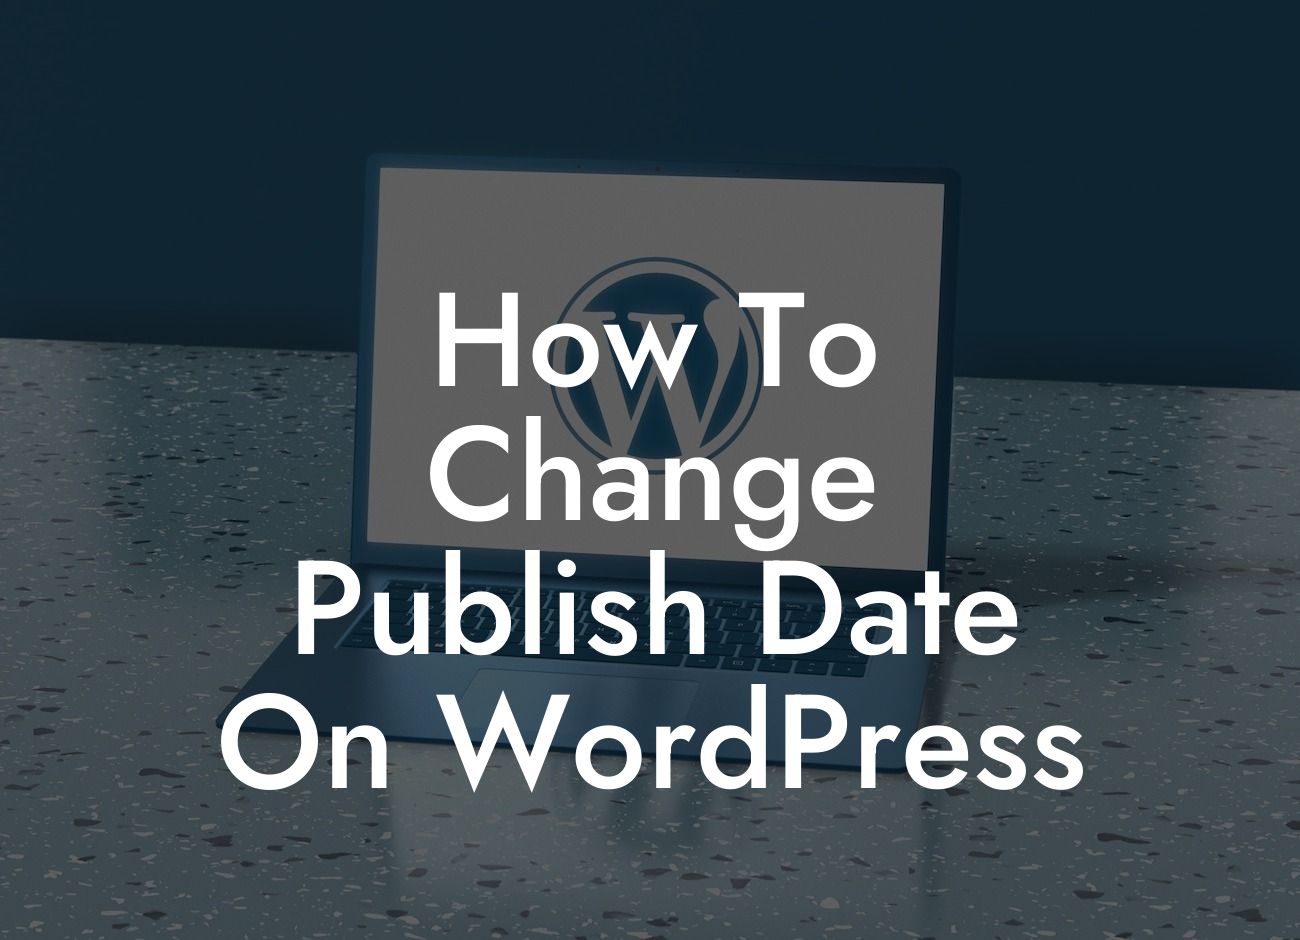 How To Change Publish Date On WordPress